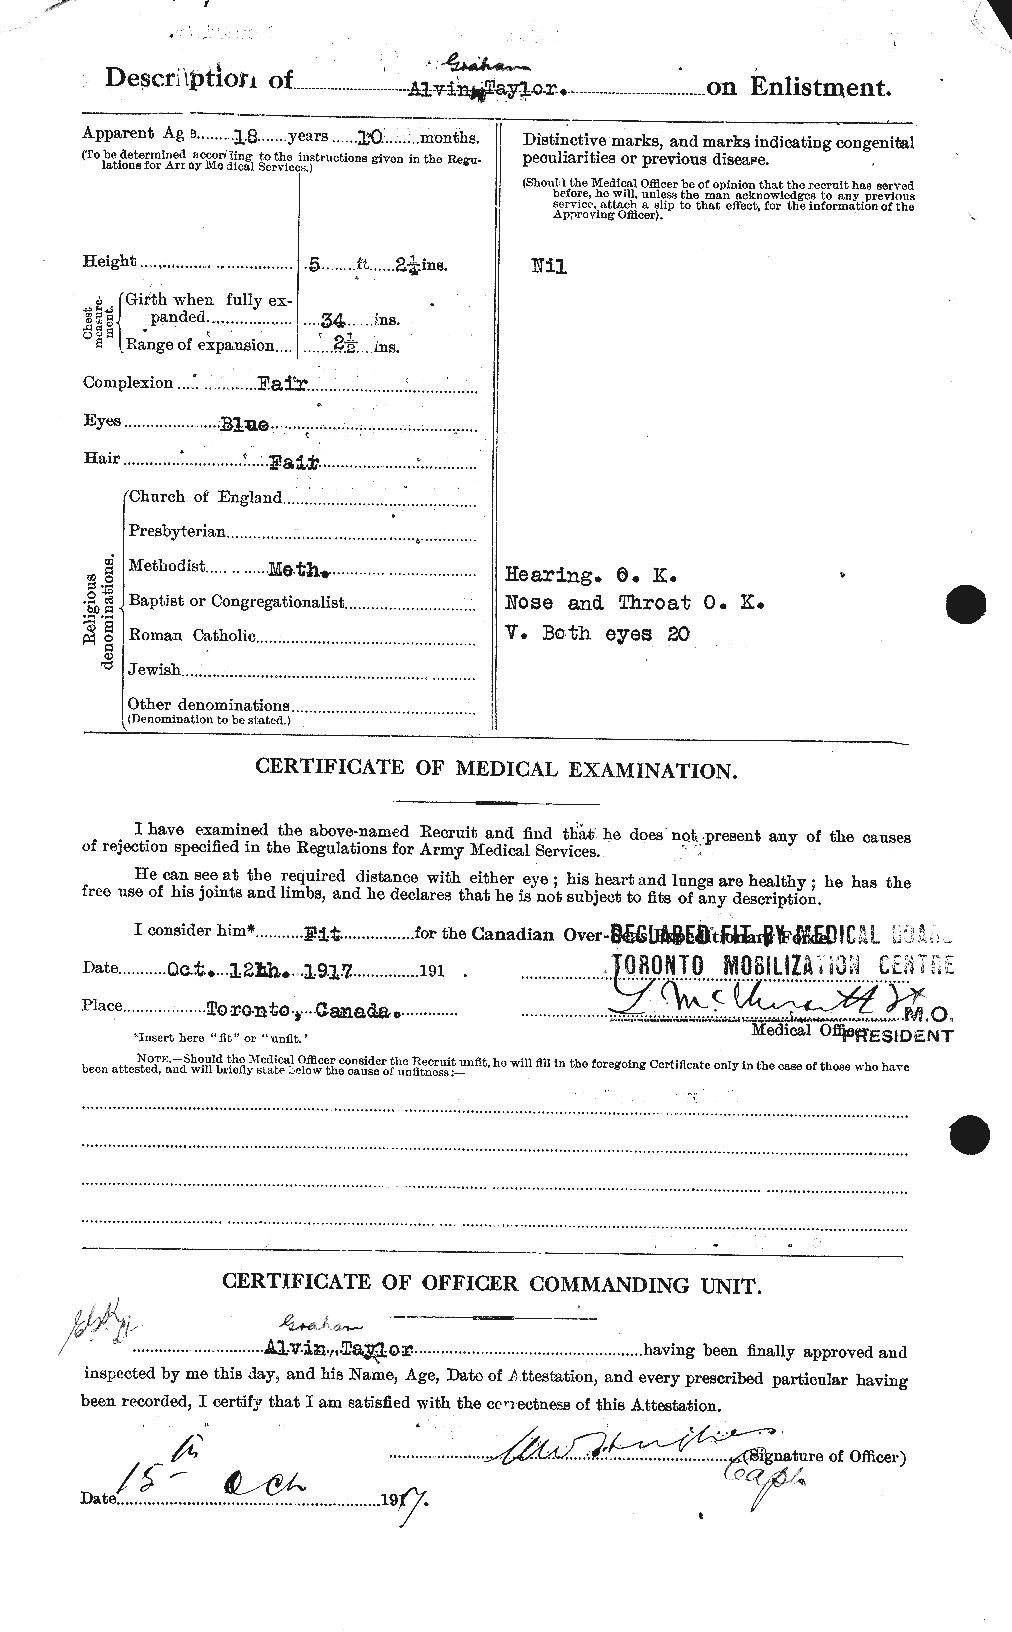 Personnel Records of the First World War - CEF 626213b